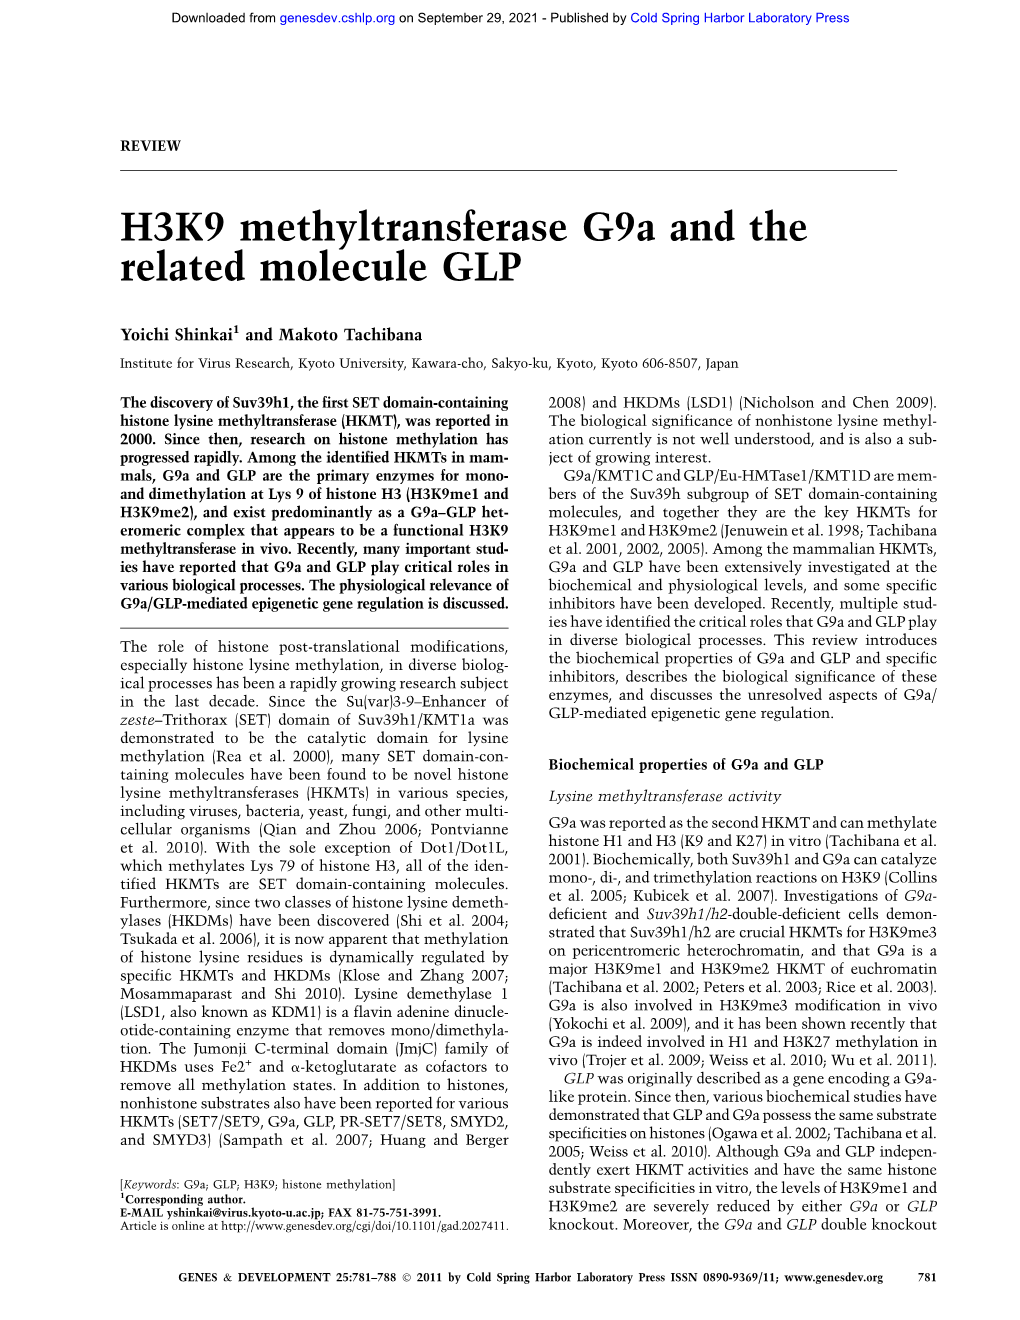 H3K9 Methyltransferase G9a and the Related Molecule GLP